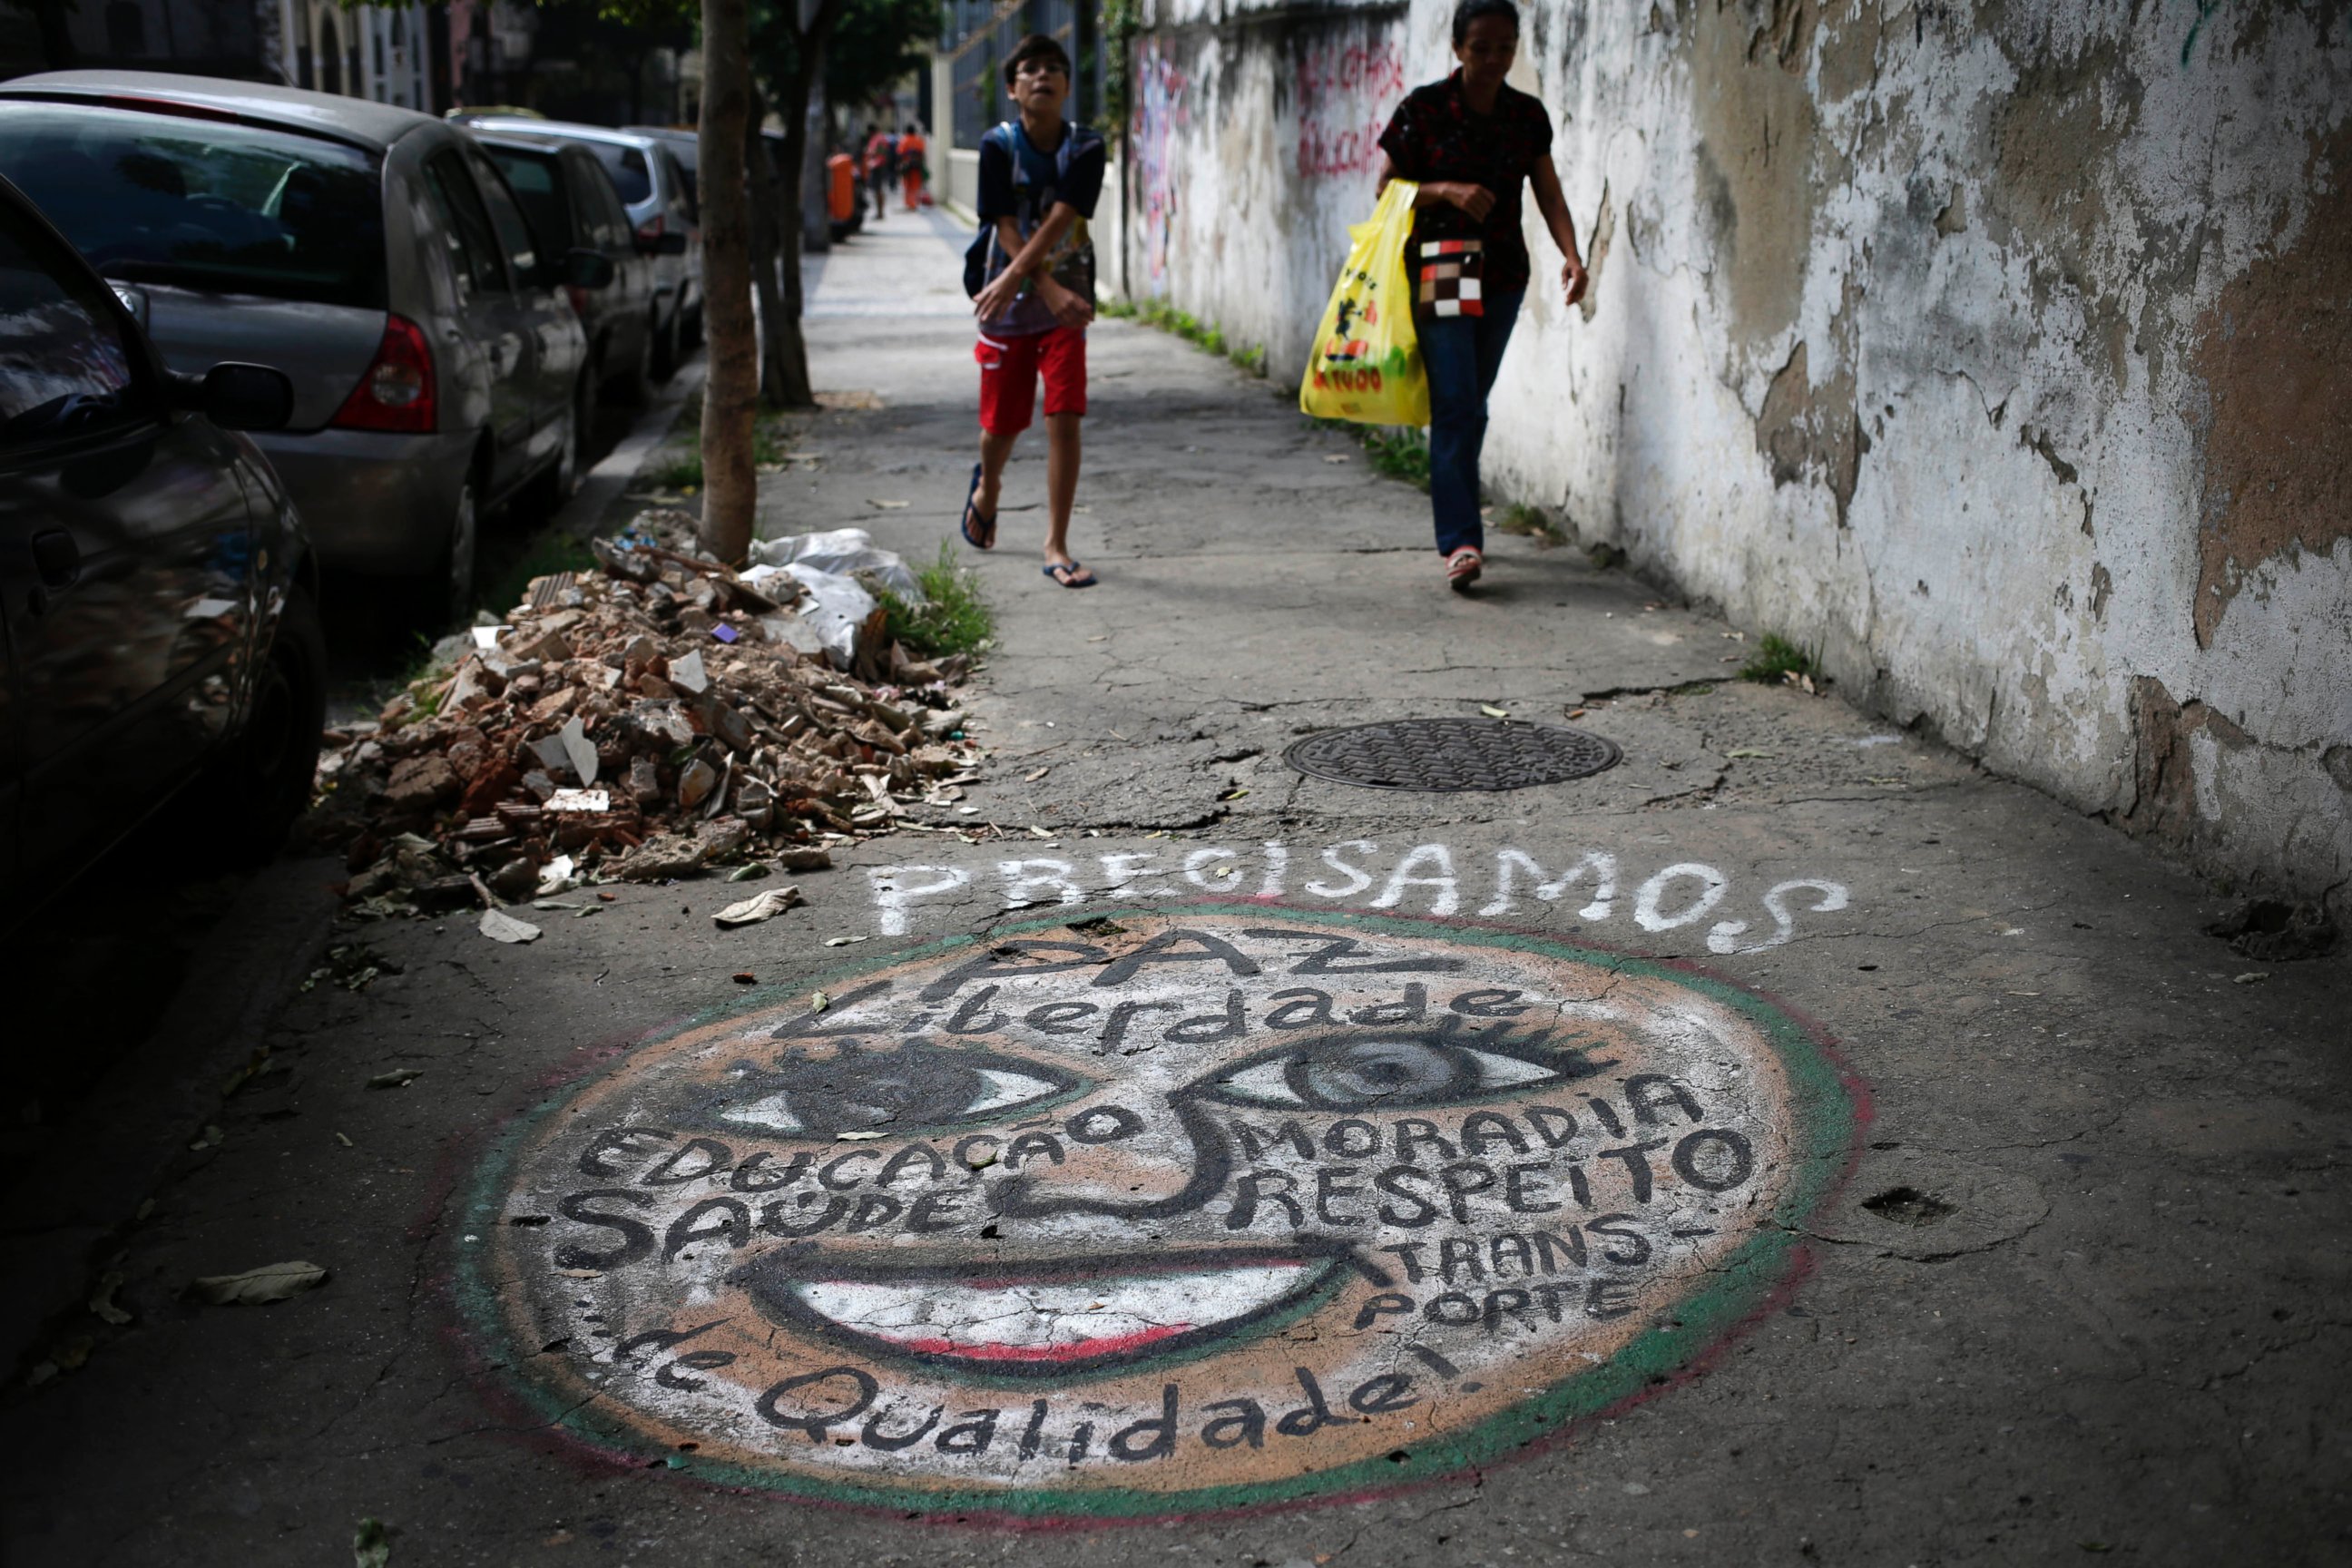 PHOTO: A mural that lists many wants including better quality health care, peace, freedom, homes and transportation, adorns a sidewalk in Rio de Janeiro, Brazil, May 21, 2014.